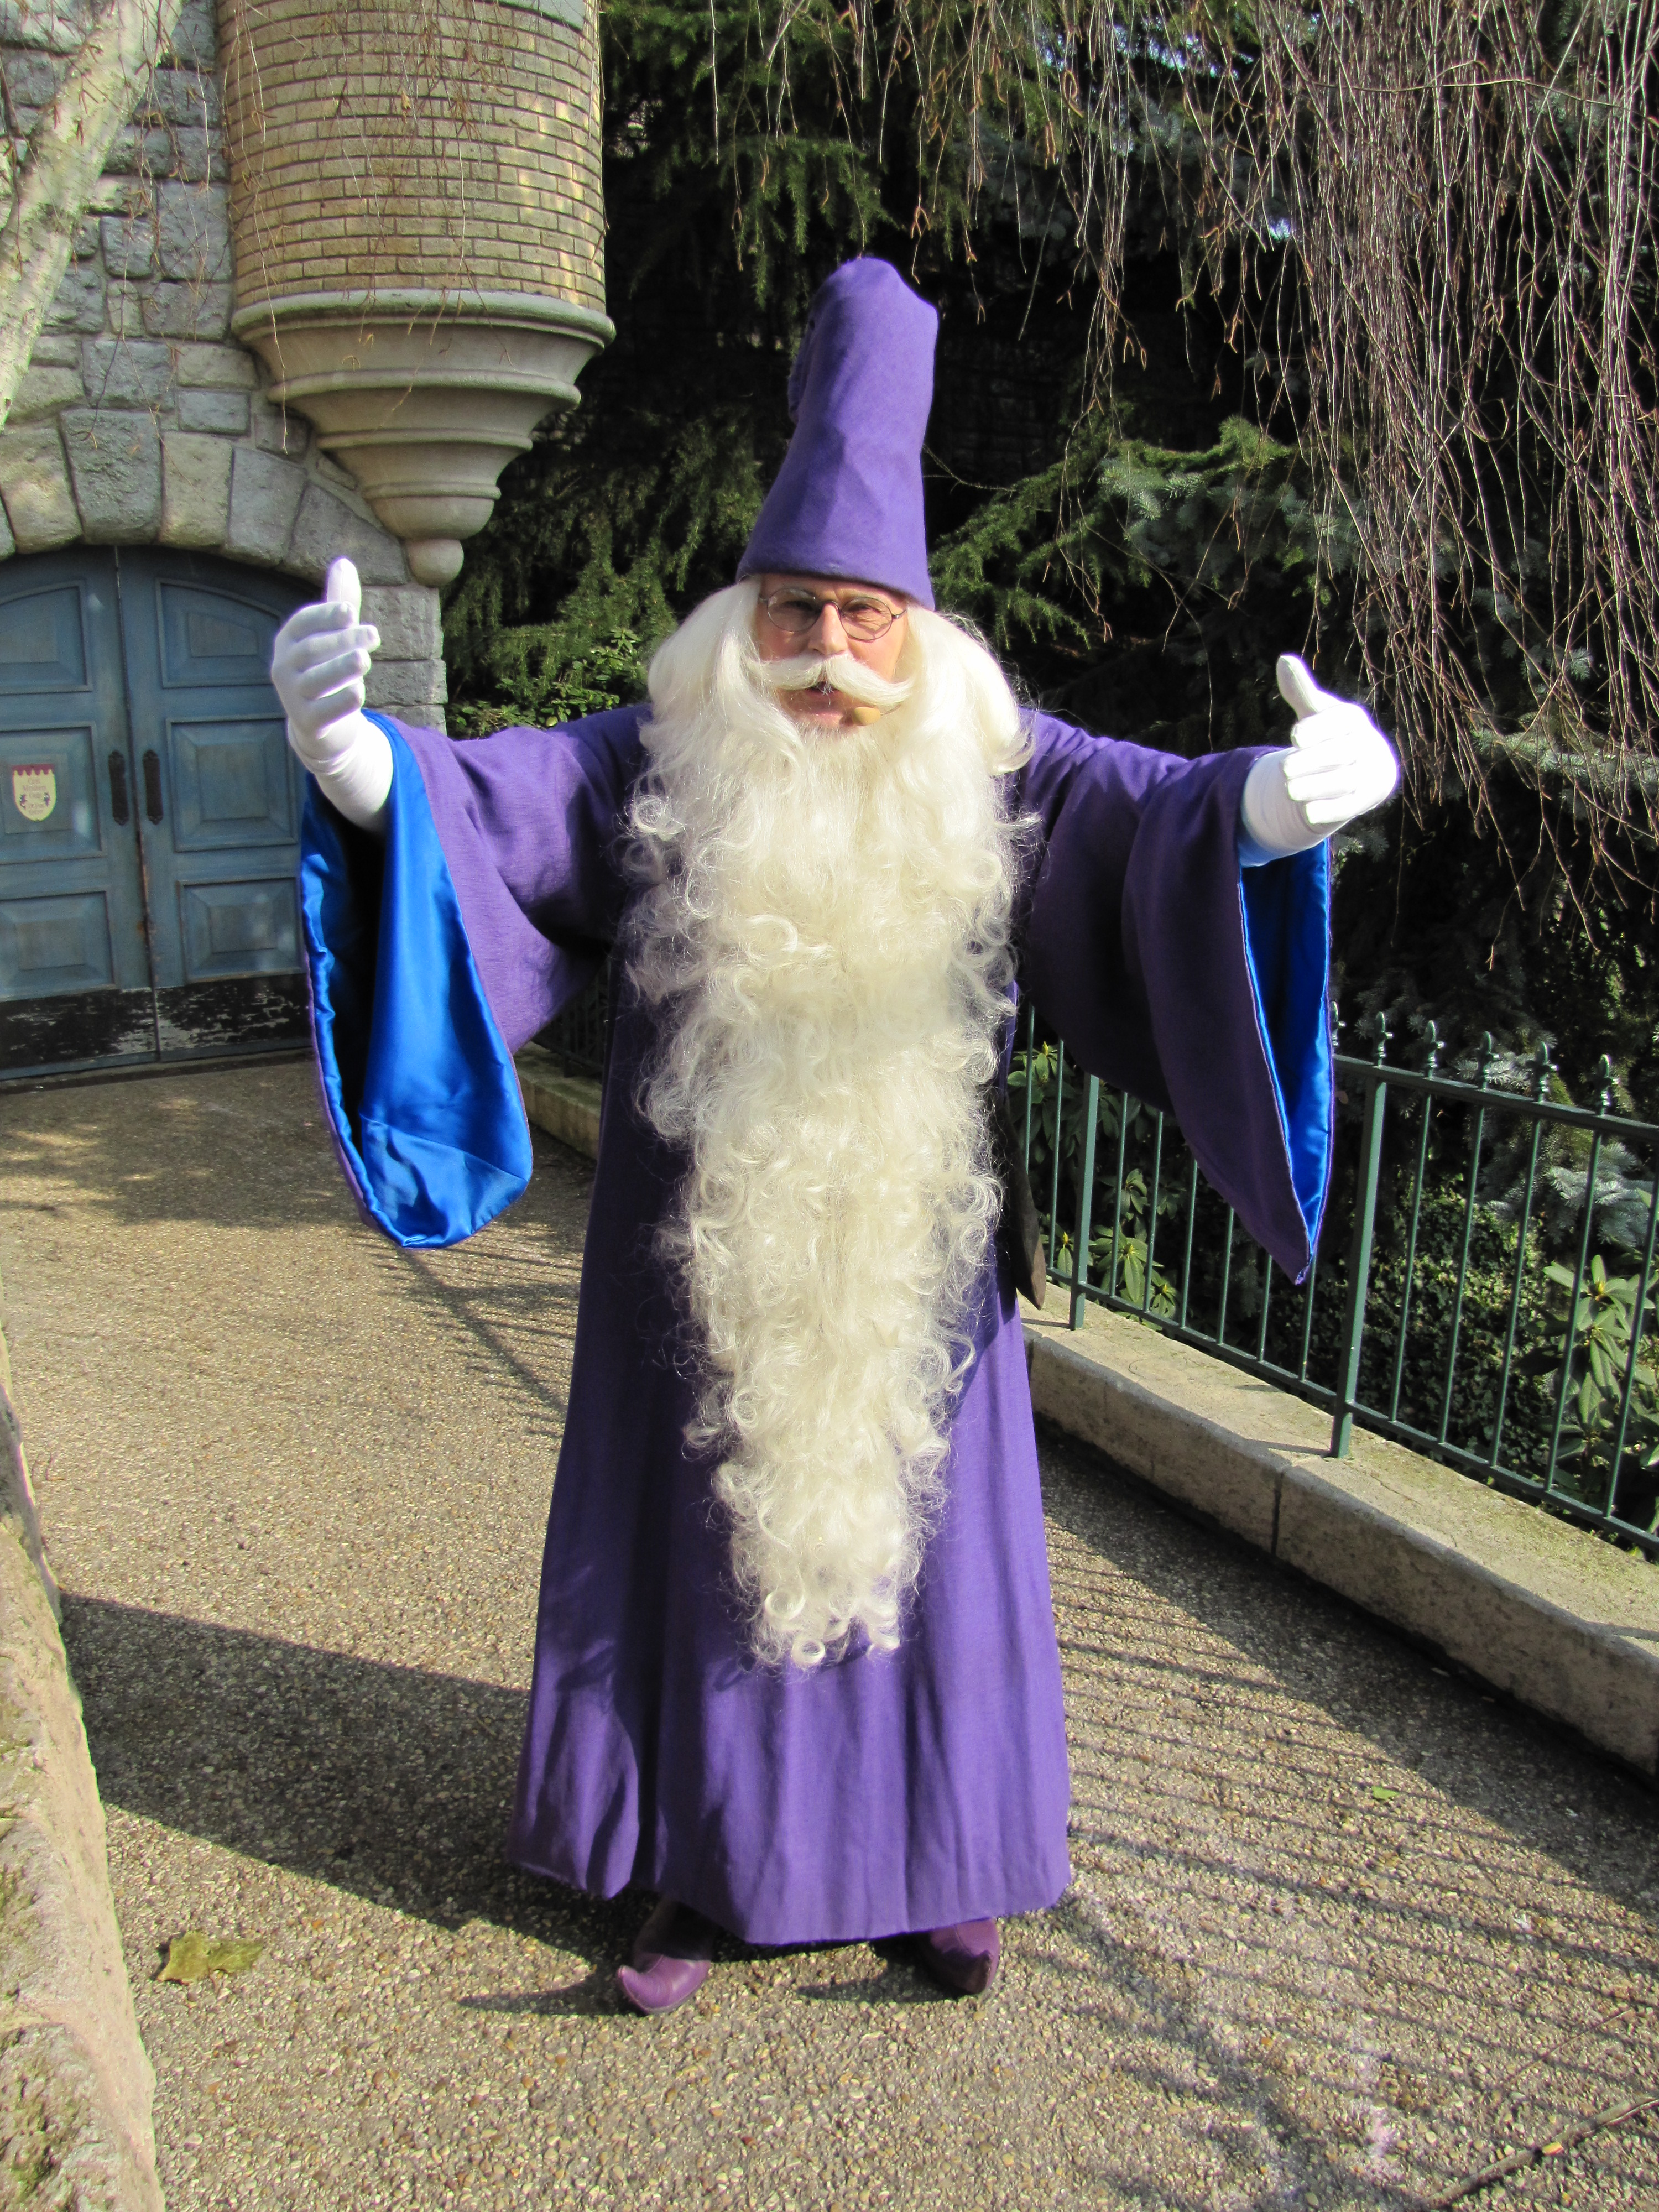 Merlin can be found in the Parade nowadays. He used to have a small show in Fantasyland and afterwards people were able to meet him.